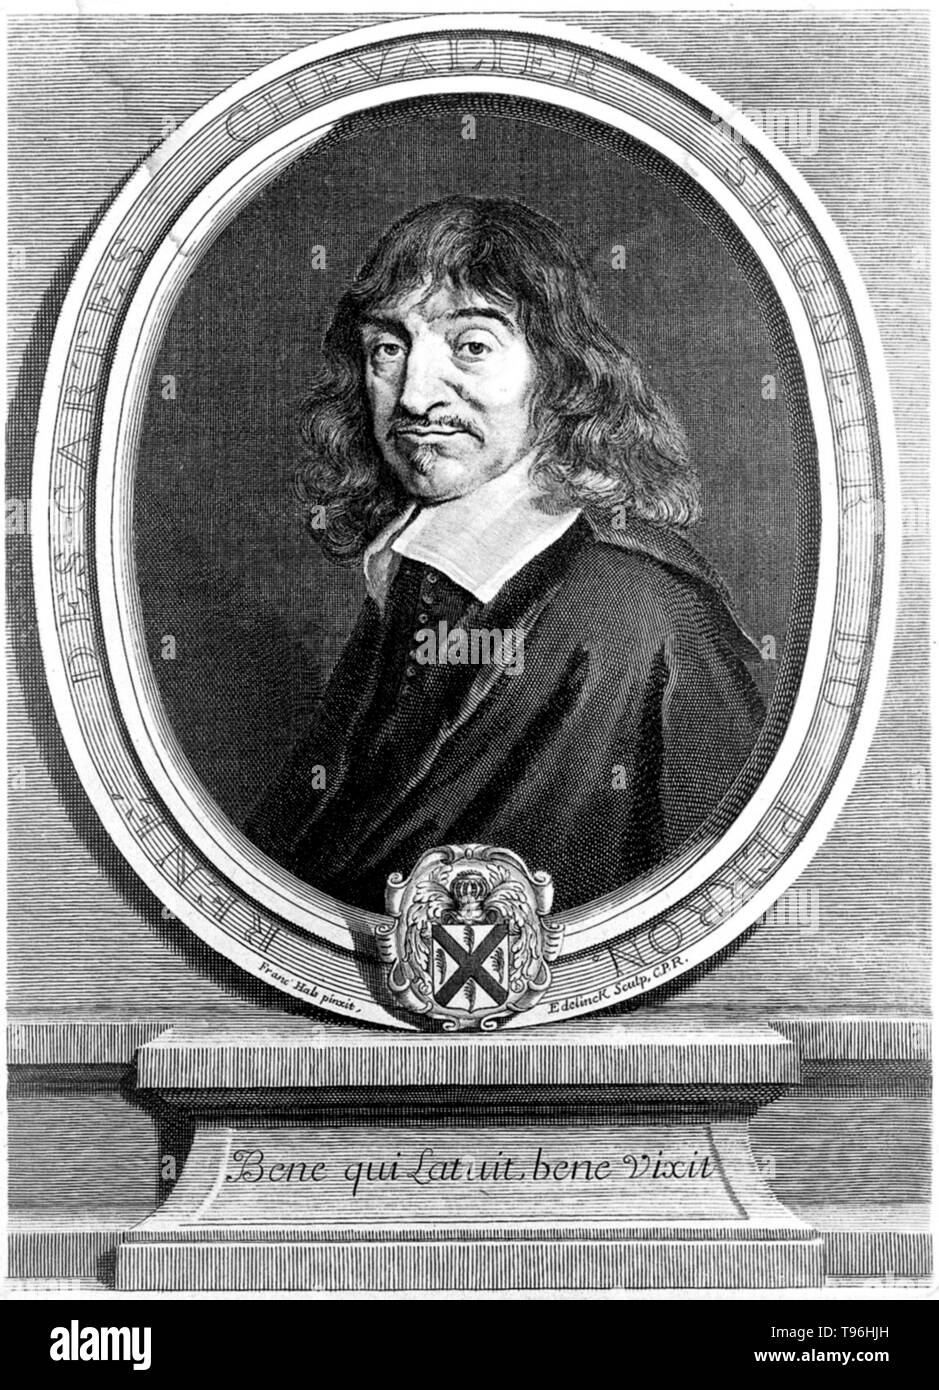 René Descartes (March 31, 1596 - February 11, 1650) was a French mathematician, philosopher and physiologist. Living on his modest inherited wealth, Descartes traveled, studied, wrote, and served as a soldier in Holland, Bohemia and Hungary. He created analytical geometry, which translates geometrical problems into algebraic form so that algebraic methods can be applied to their solution. Conversely he applied geometry to algebra. Stock Photo